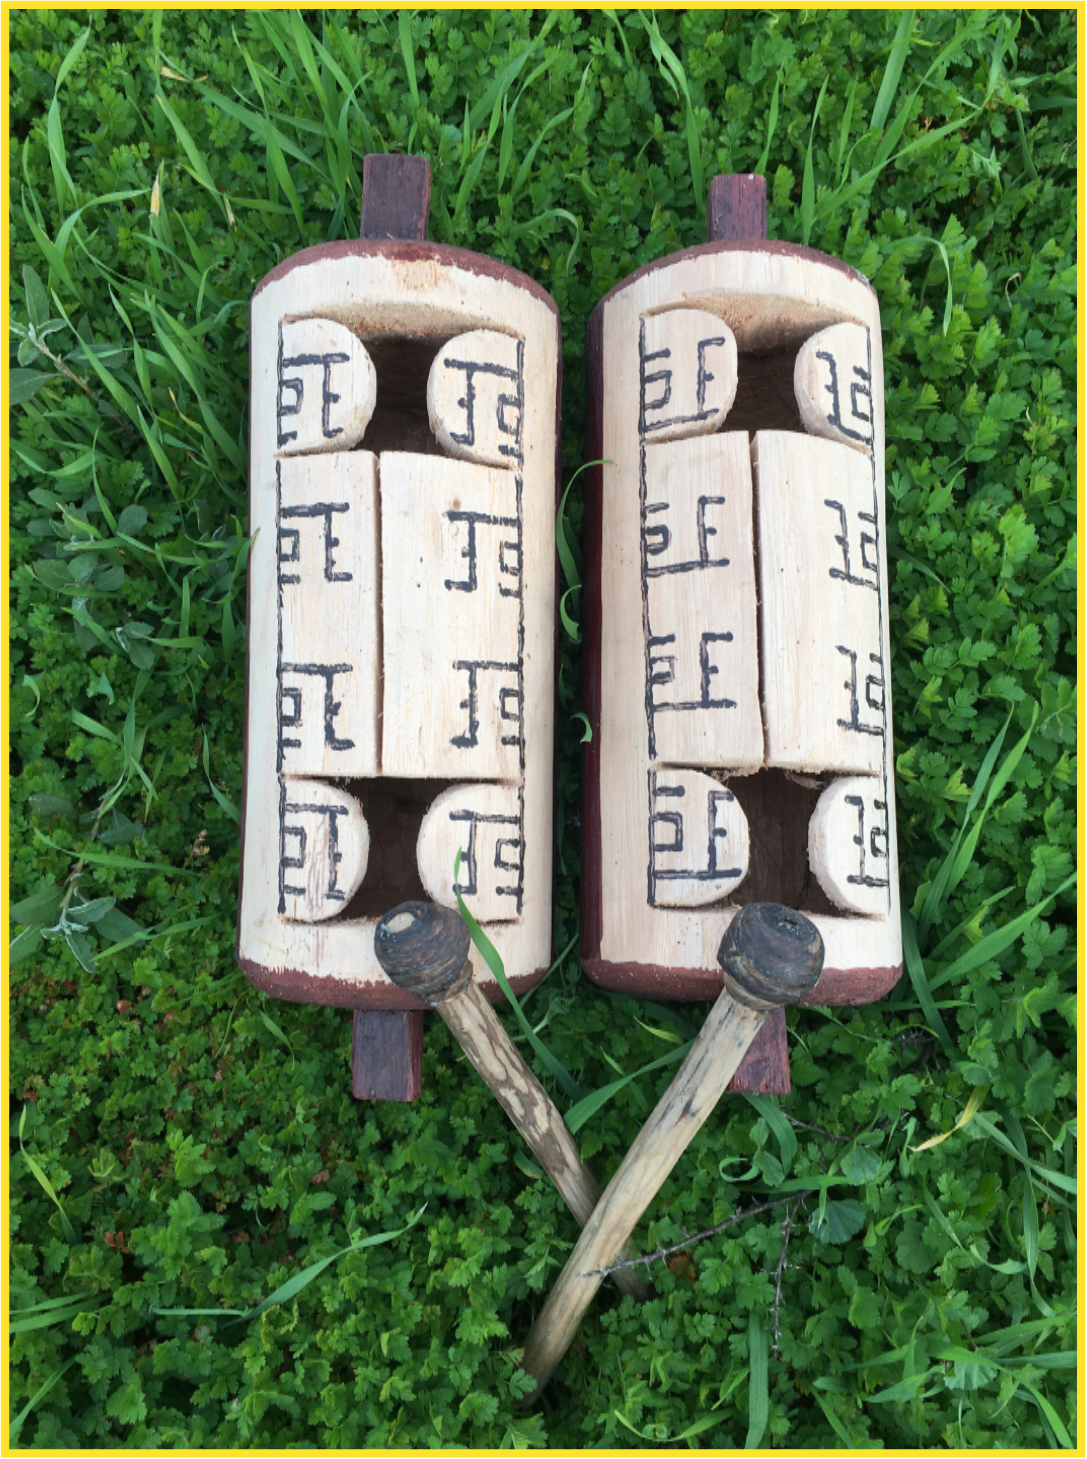 Two carved wooden drums on grass background